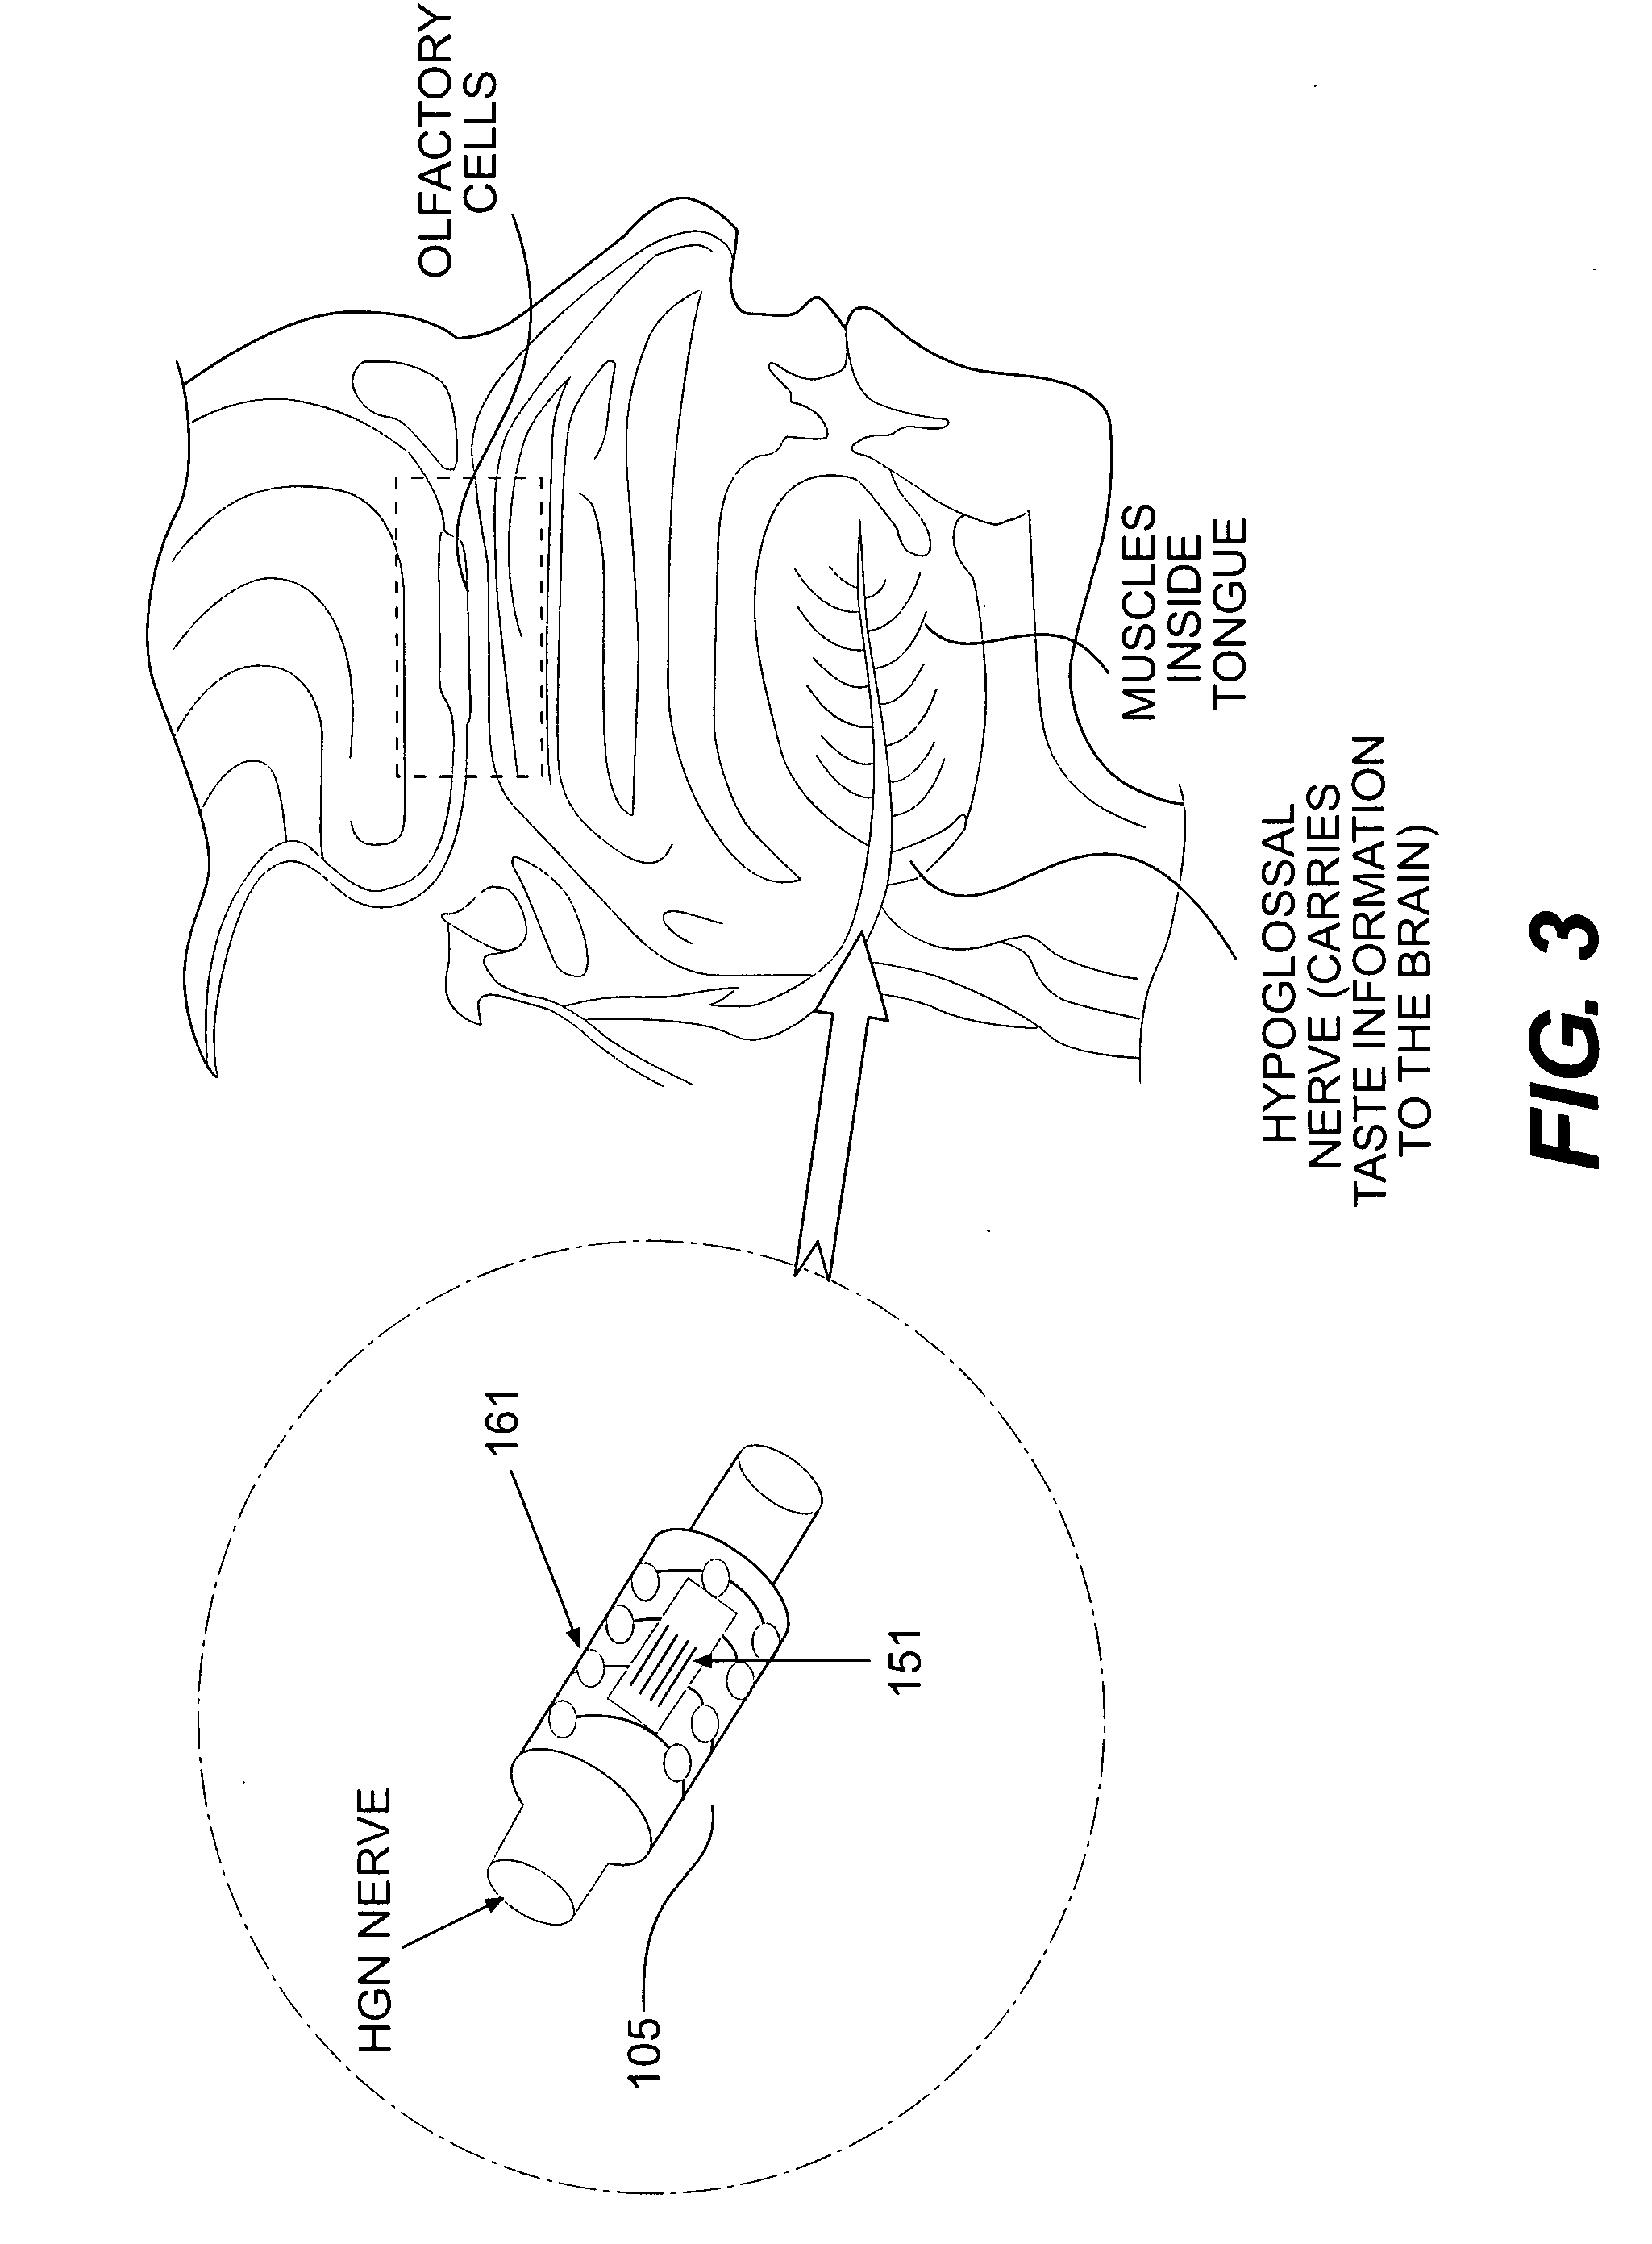 RFID-based apparatus, system, and method for therapeutic treatment of a patient